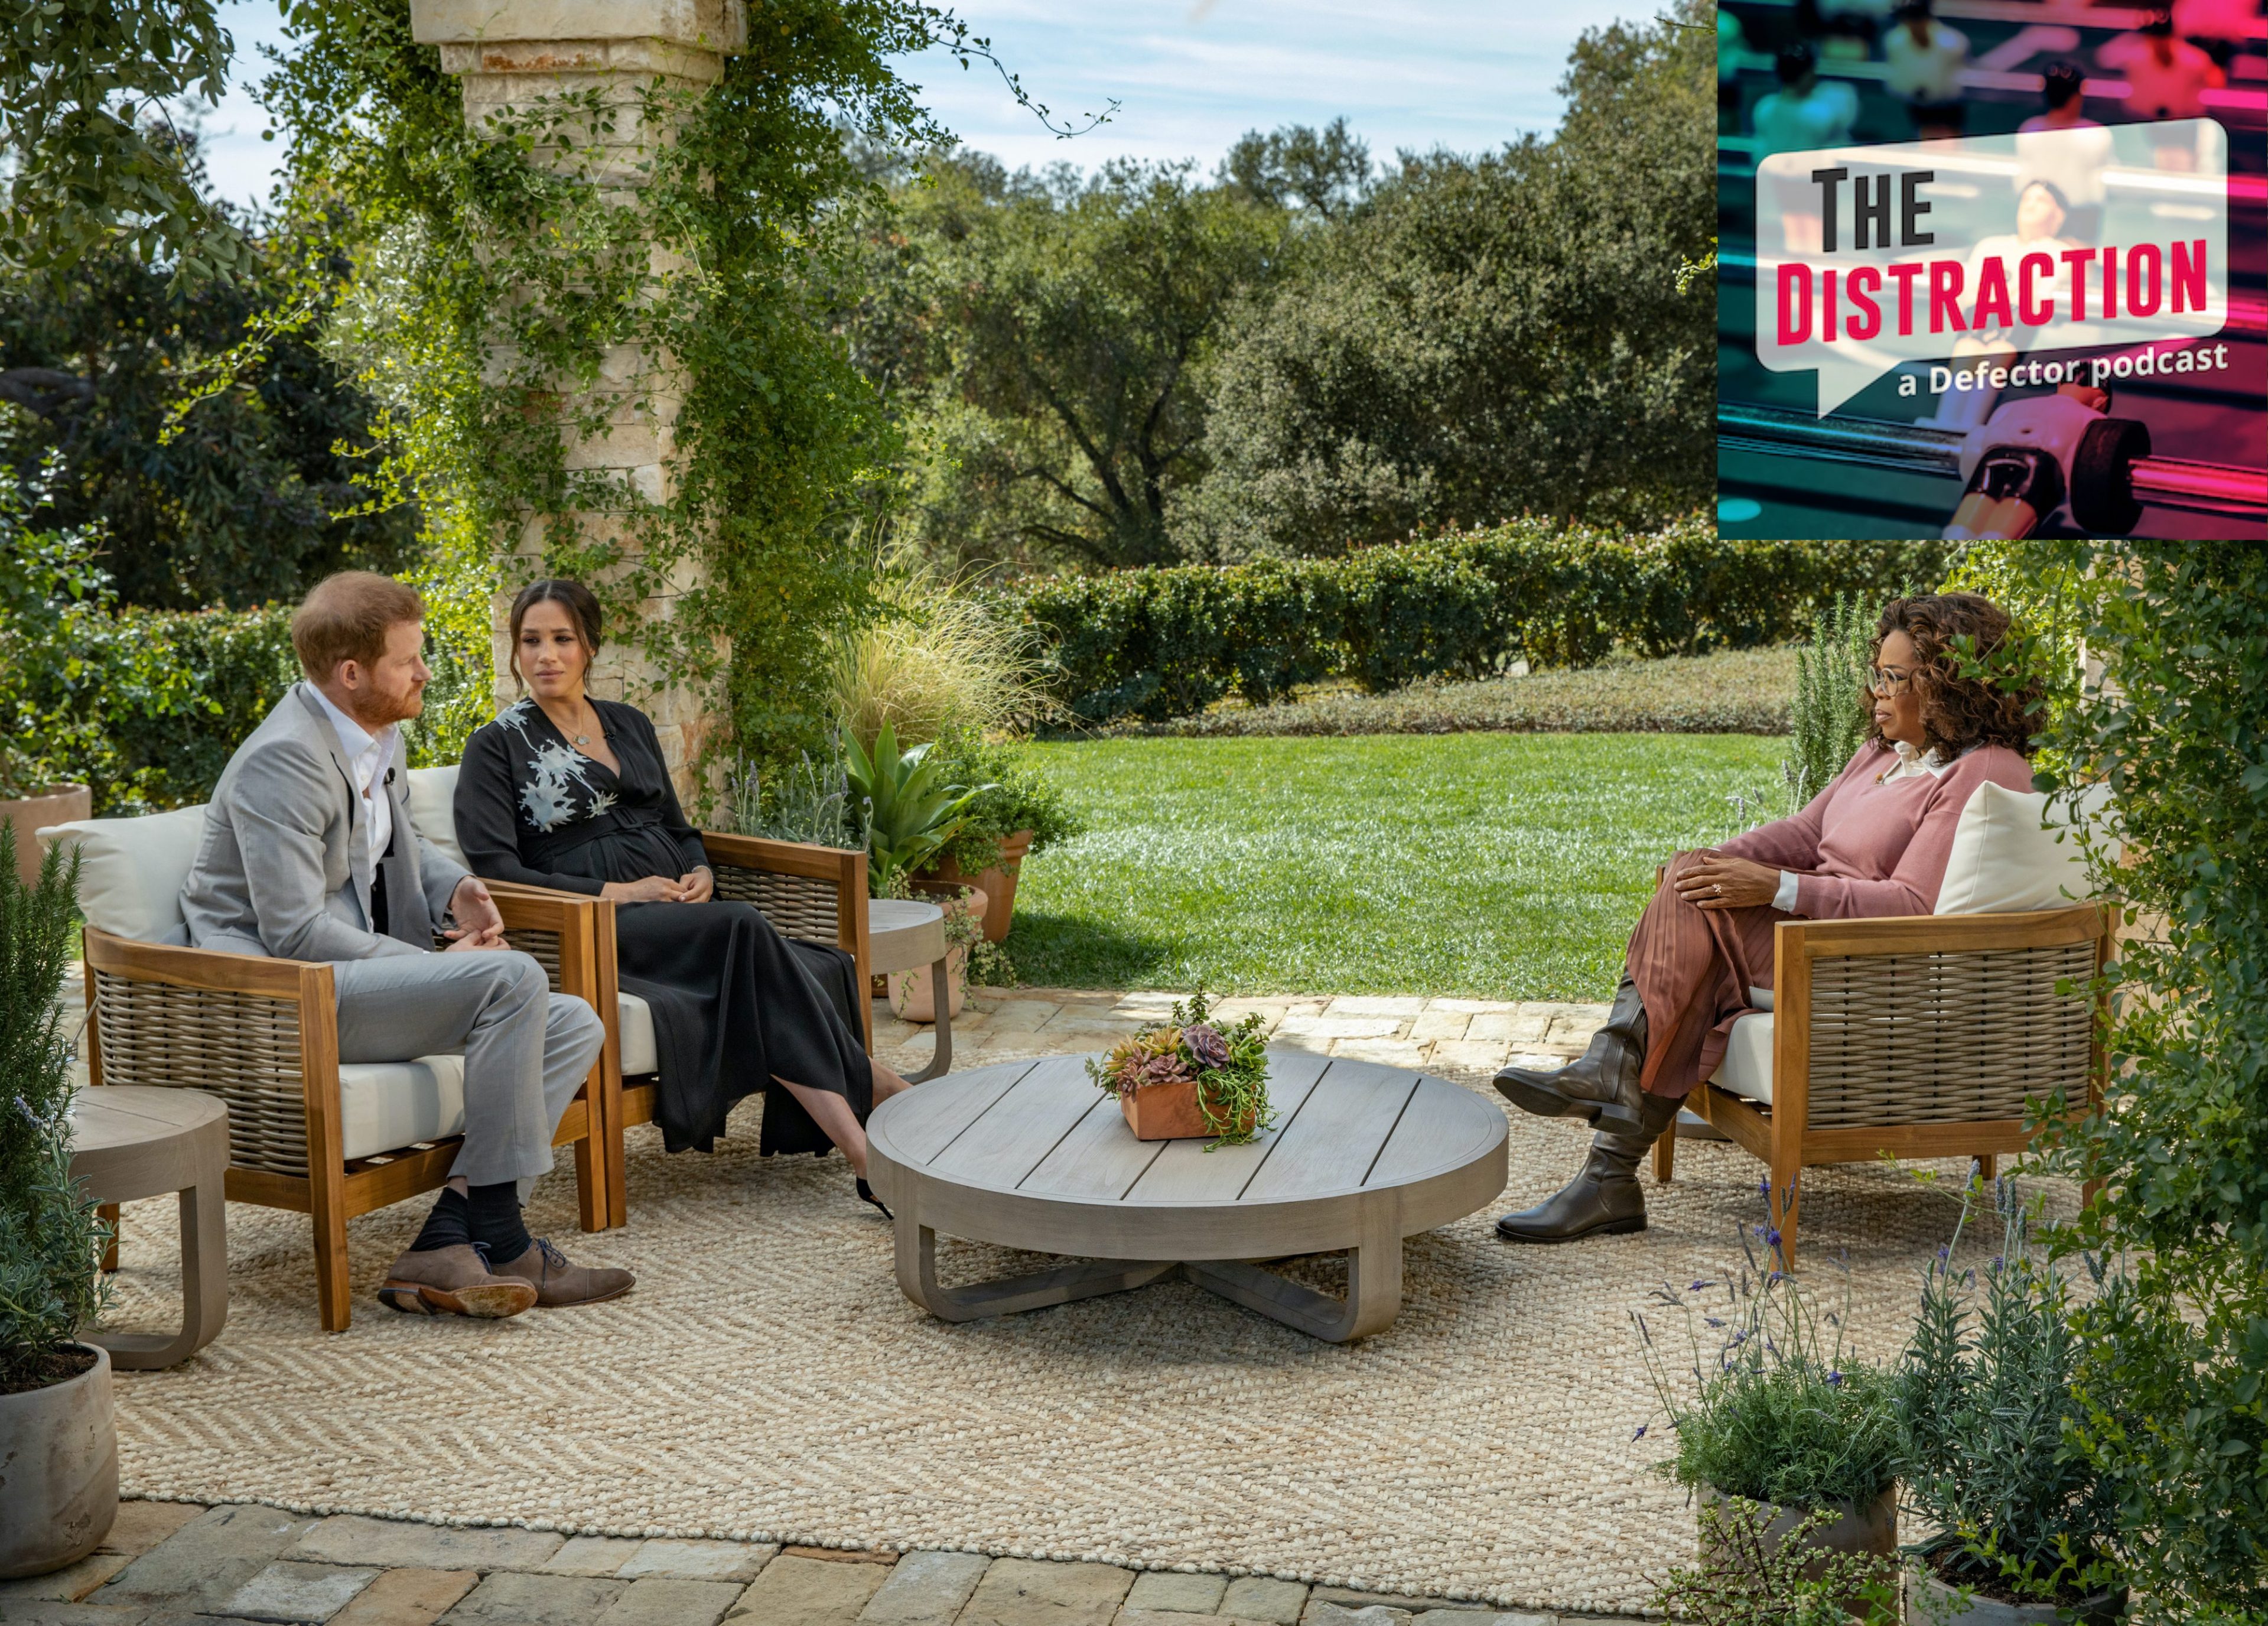 Oprah Winfrey interviews Prince Harry and Meghan Markle in a very nice garden setting.